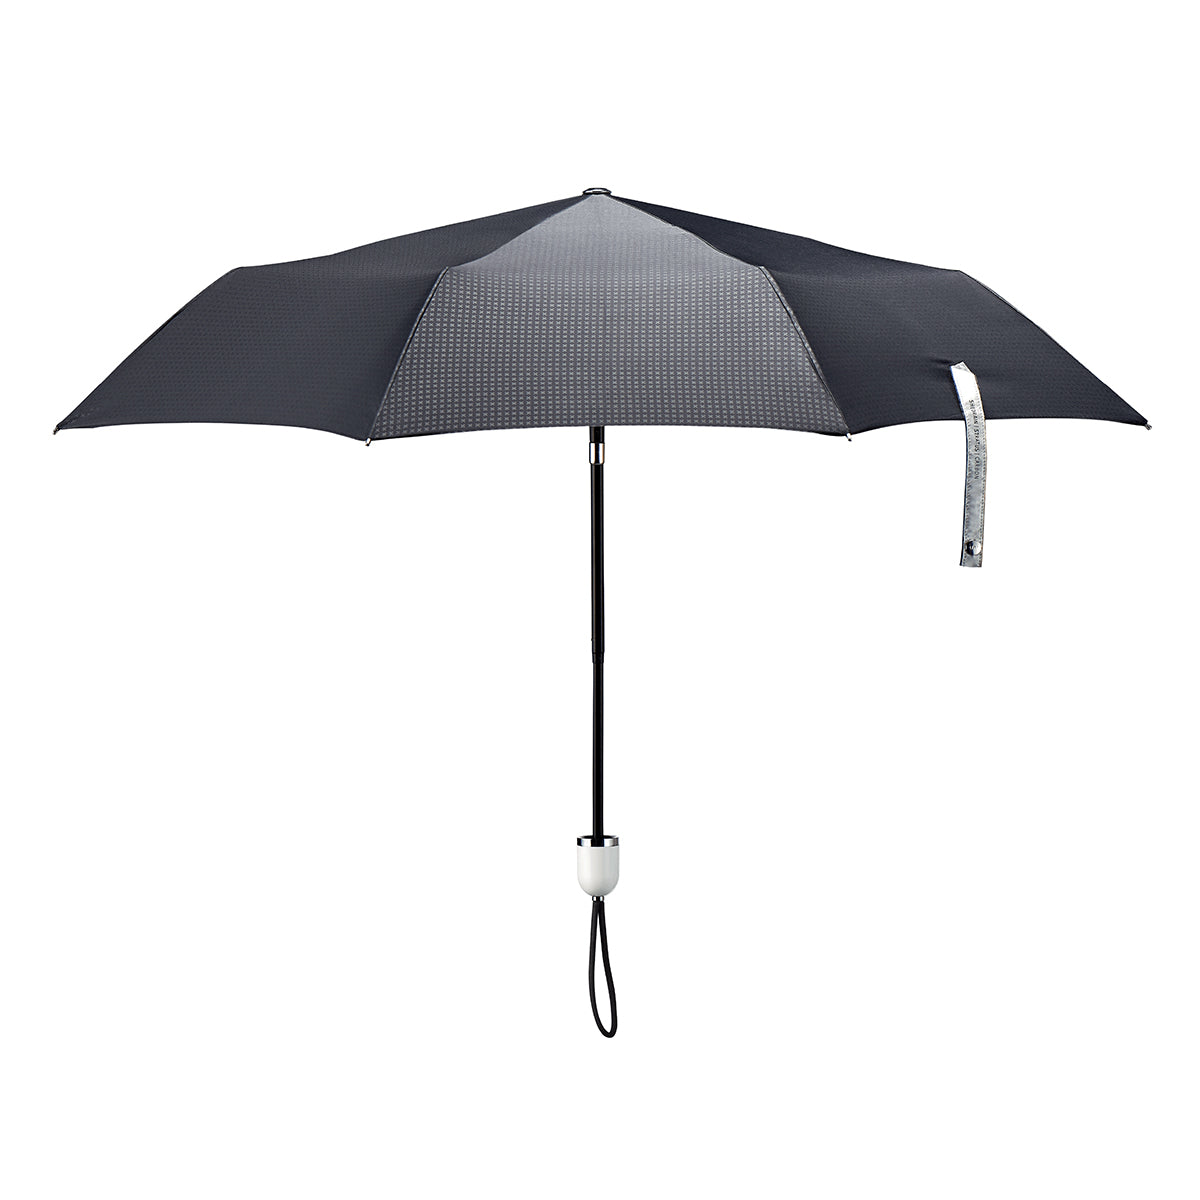 straight on view of a handmade manual open compact luxury umbrella with a glossy piano finish bright white handle, detachable waxed cotton wrist strap, Teflon-coated fine denier woven black polyester twill canopy, chrome trim, Trilobe aircraft aluminum shaft, fiberglass ribs, and a reflective strap embroidered with “ShedRain Stratus.”